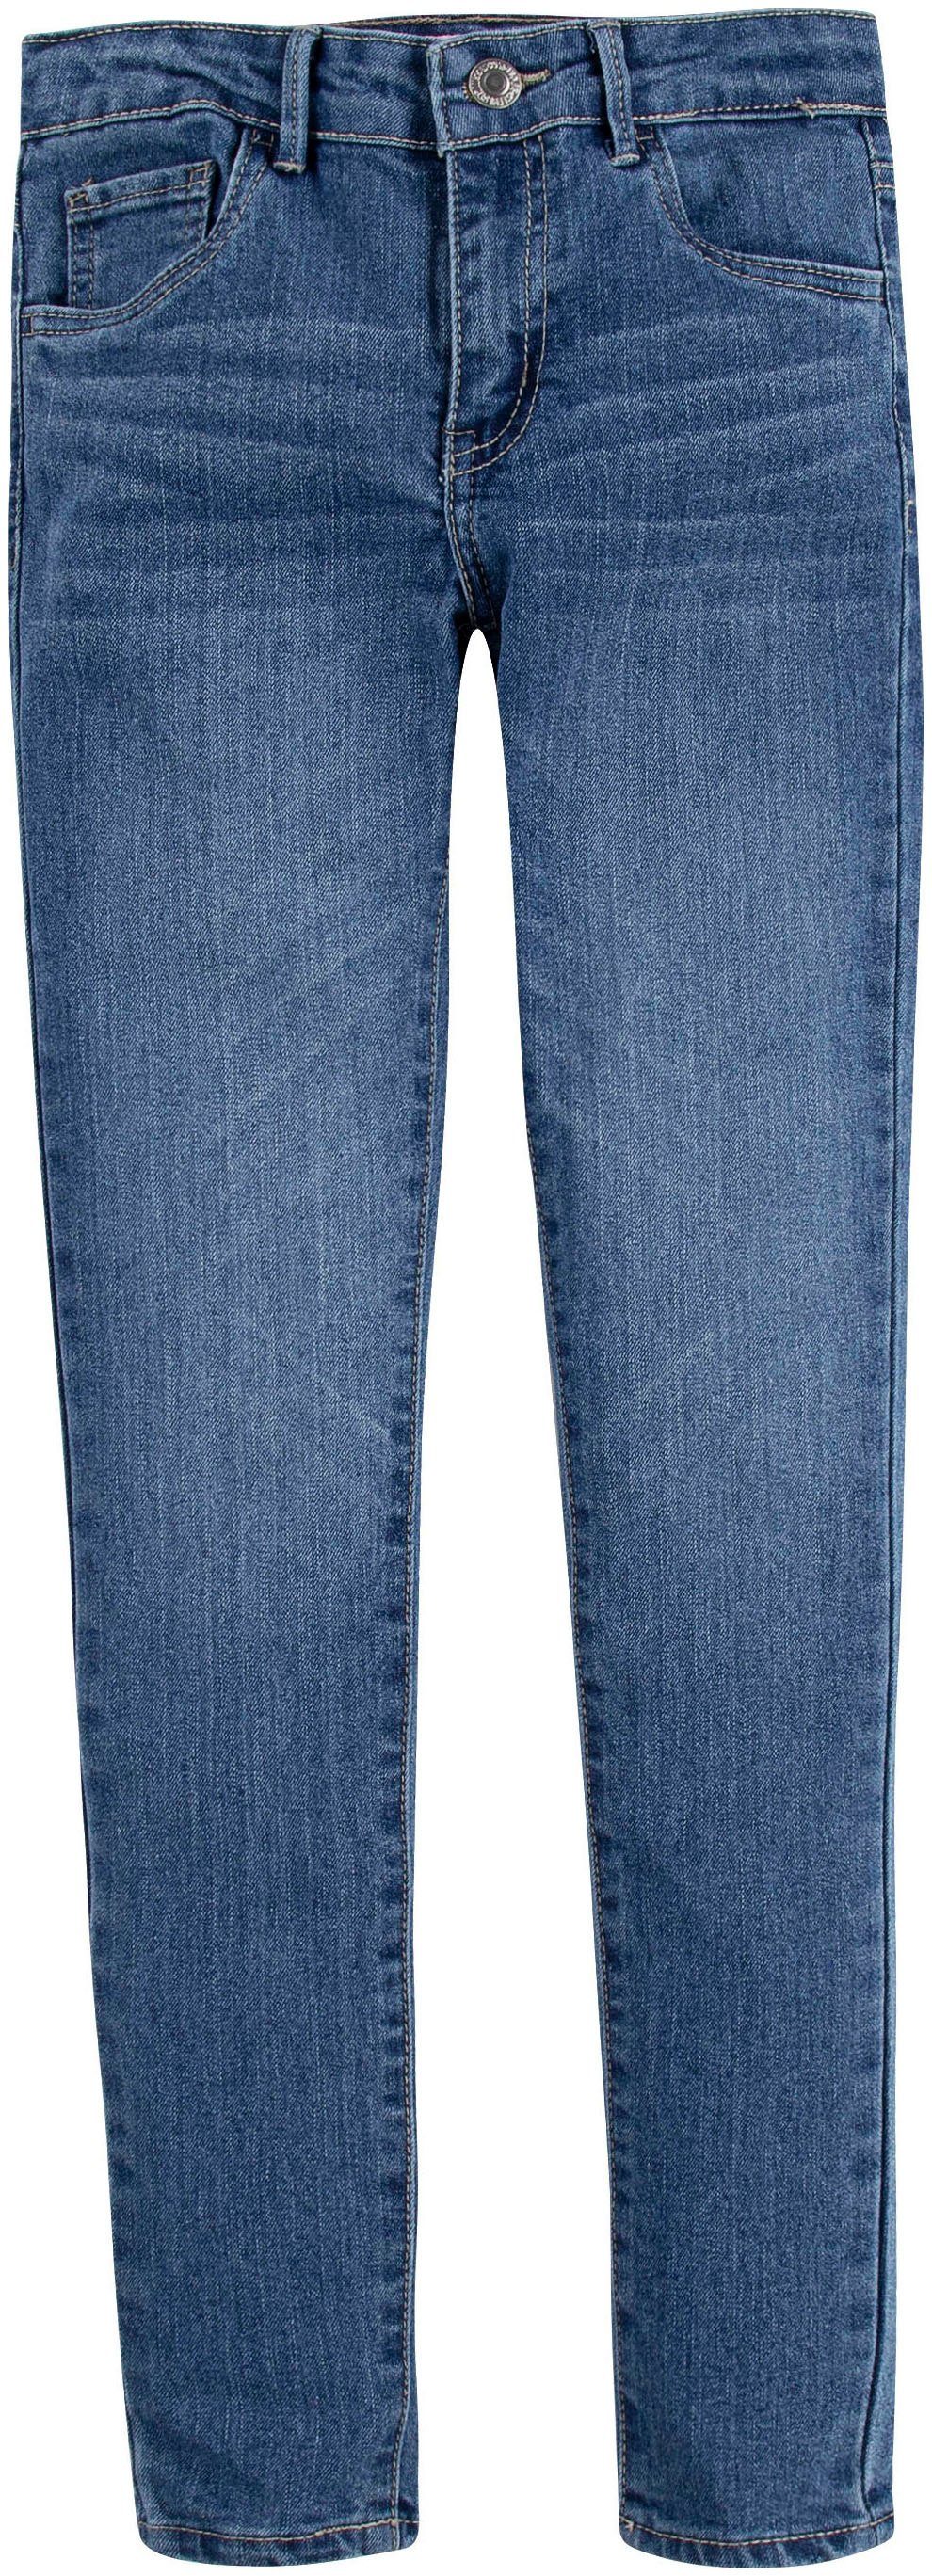 used Stretch-Jeans GIRLS FIT for Levi's® SUPER Kids 710™ blue mid JEANS SKINNY